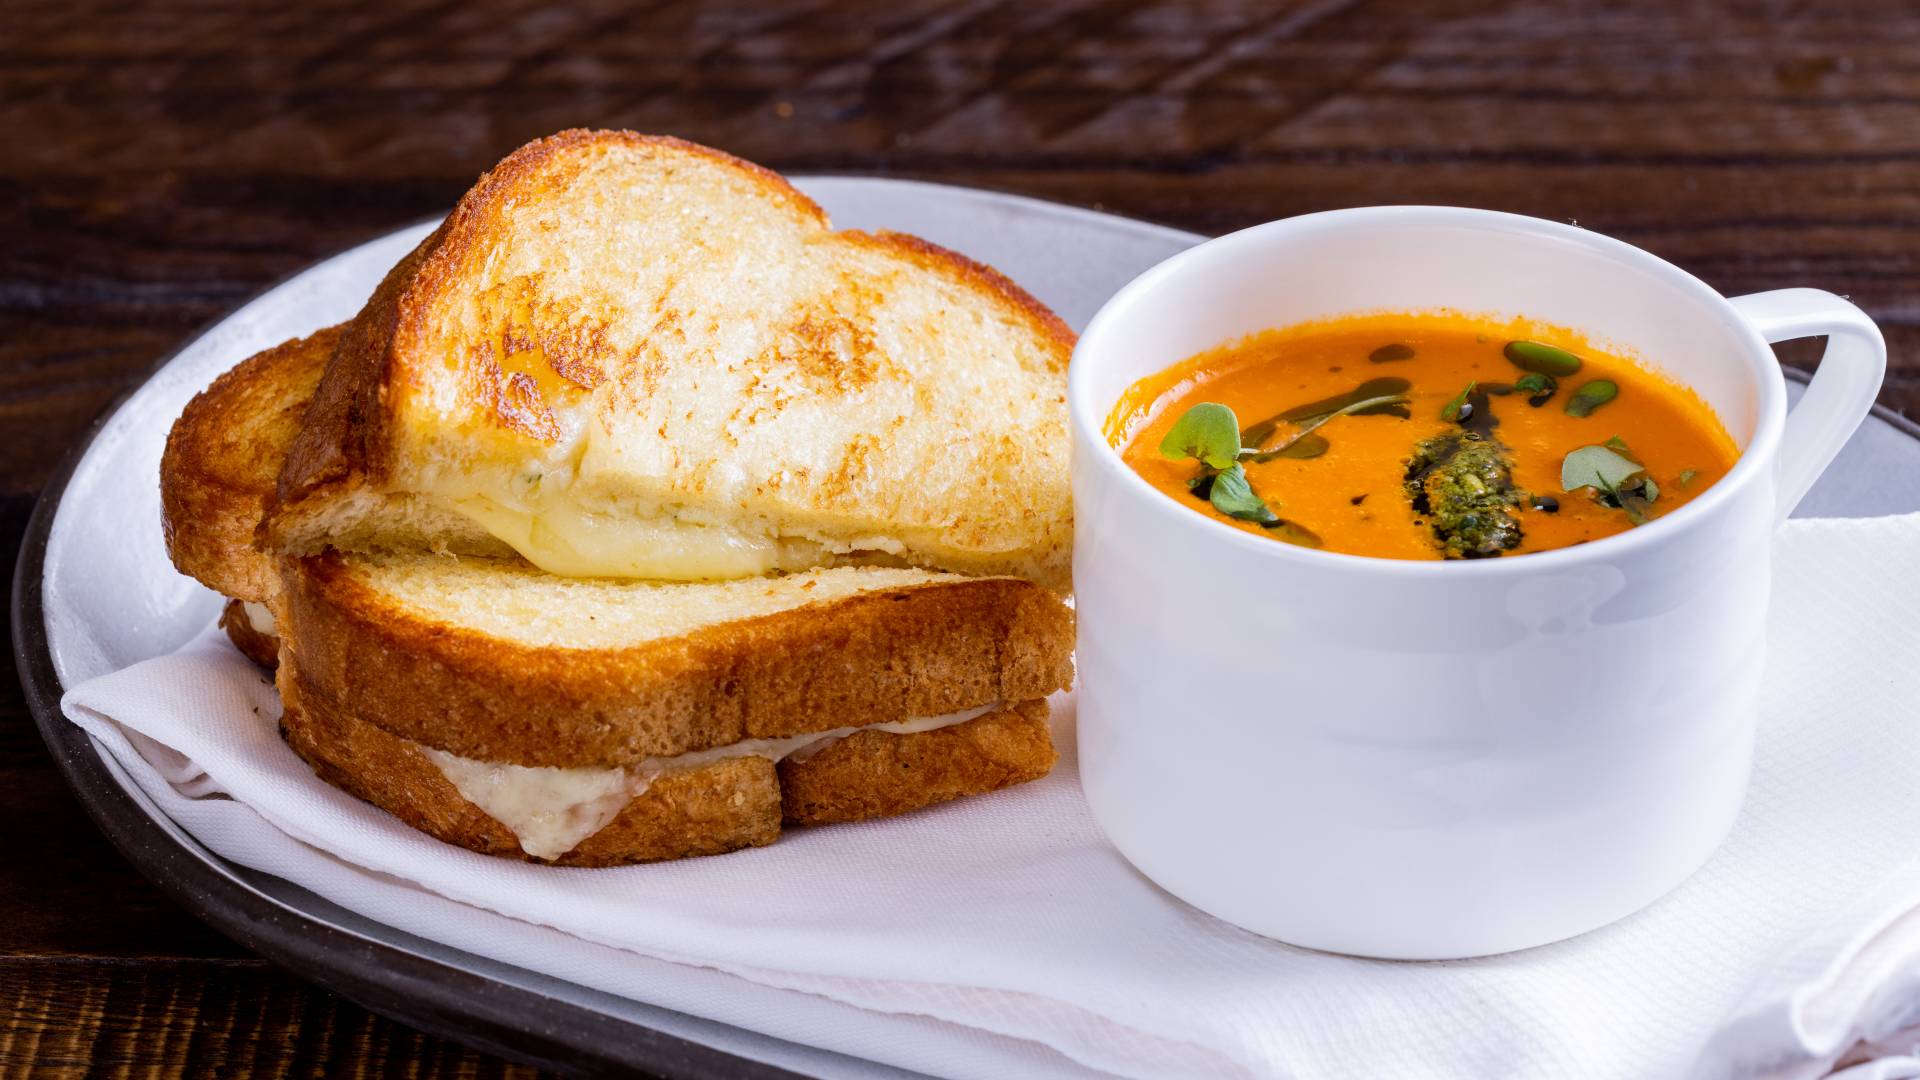 Soup and Grilled Cheese Sandwich at Powder Restaurant